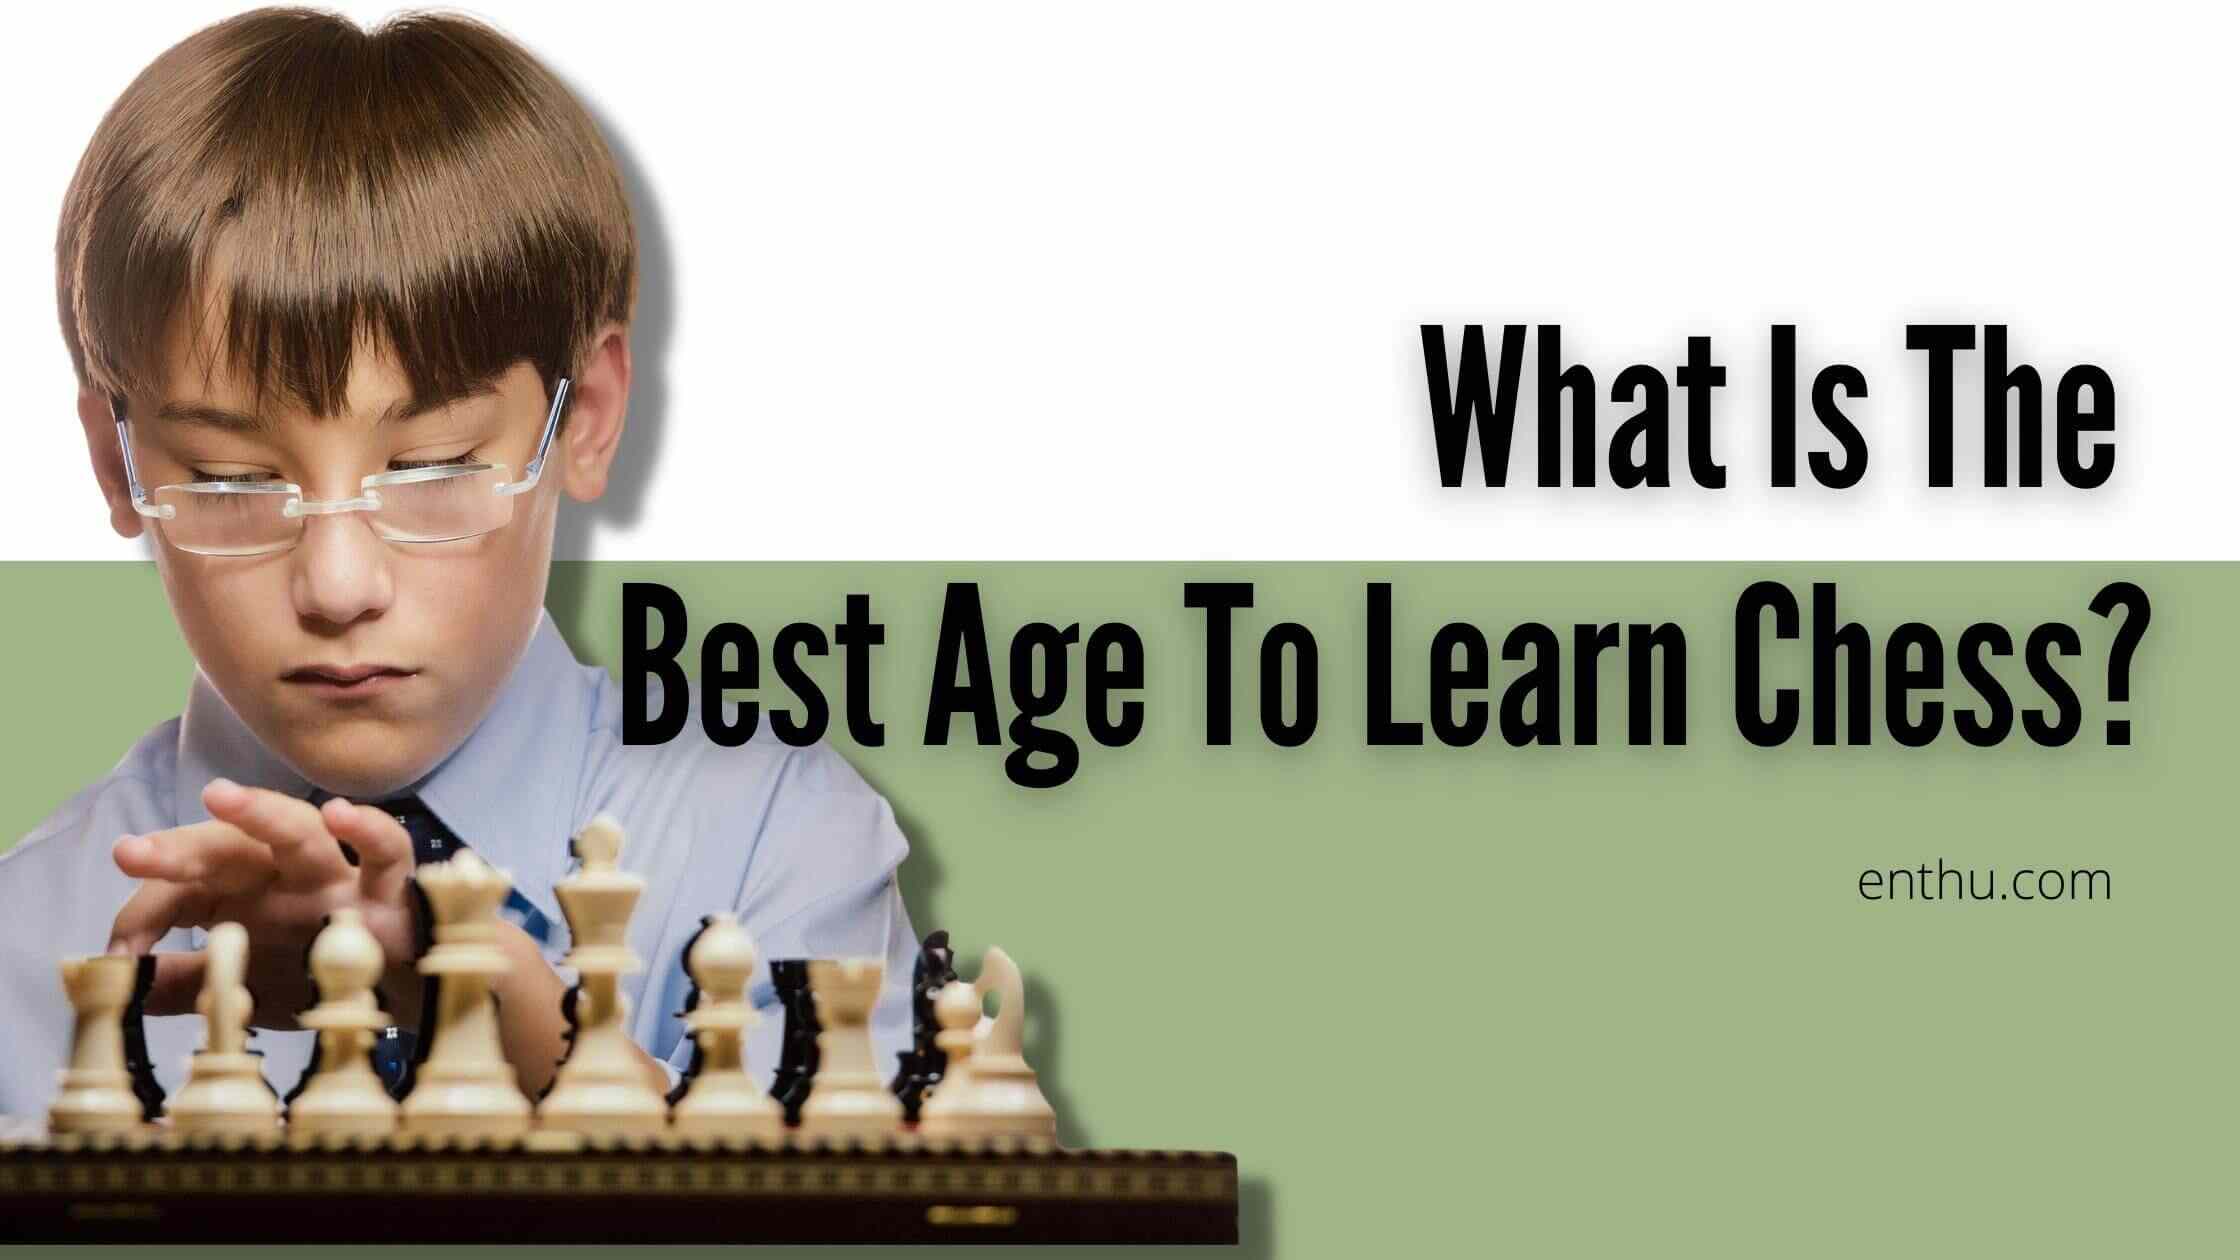 Chess - Play & Learn+ by Chess.com